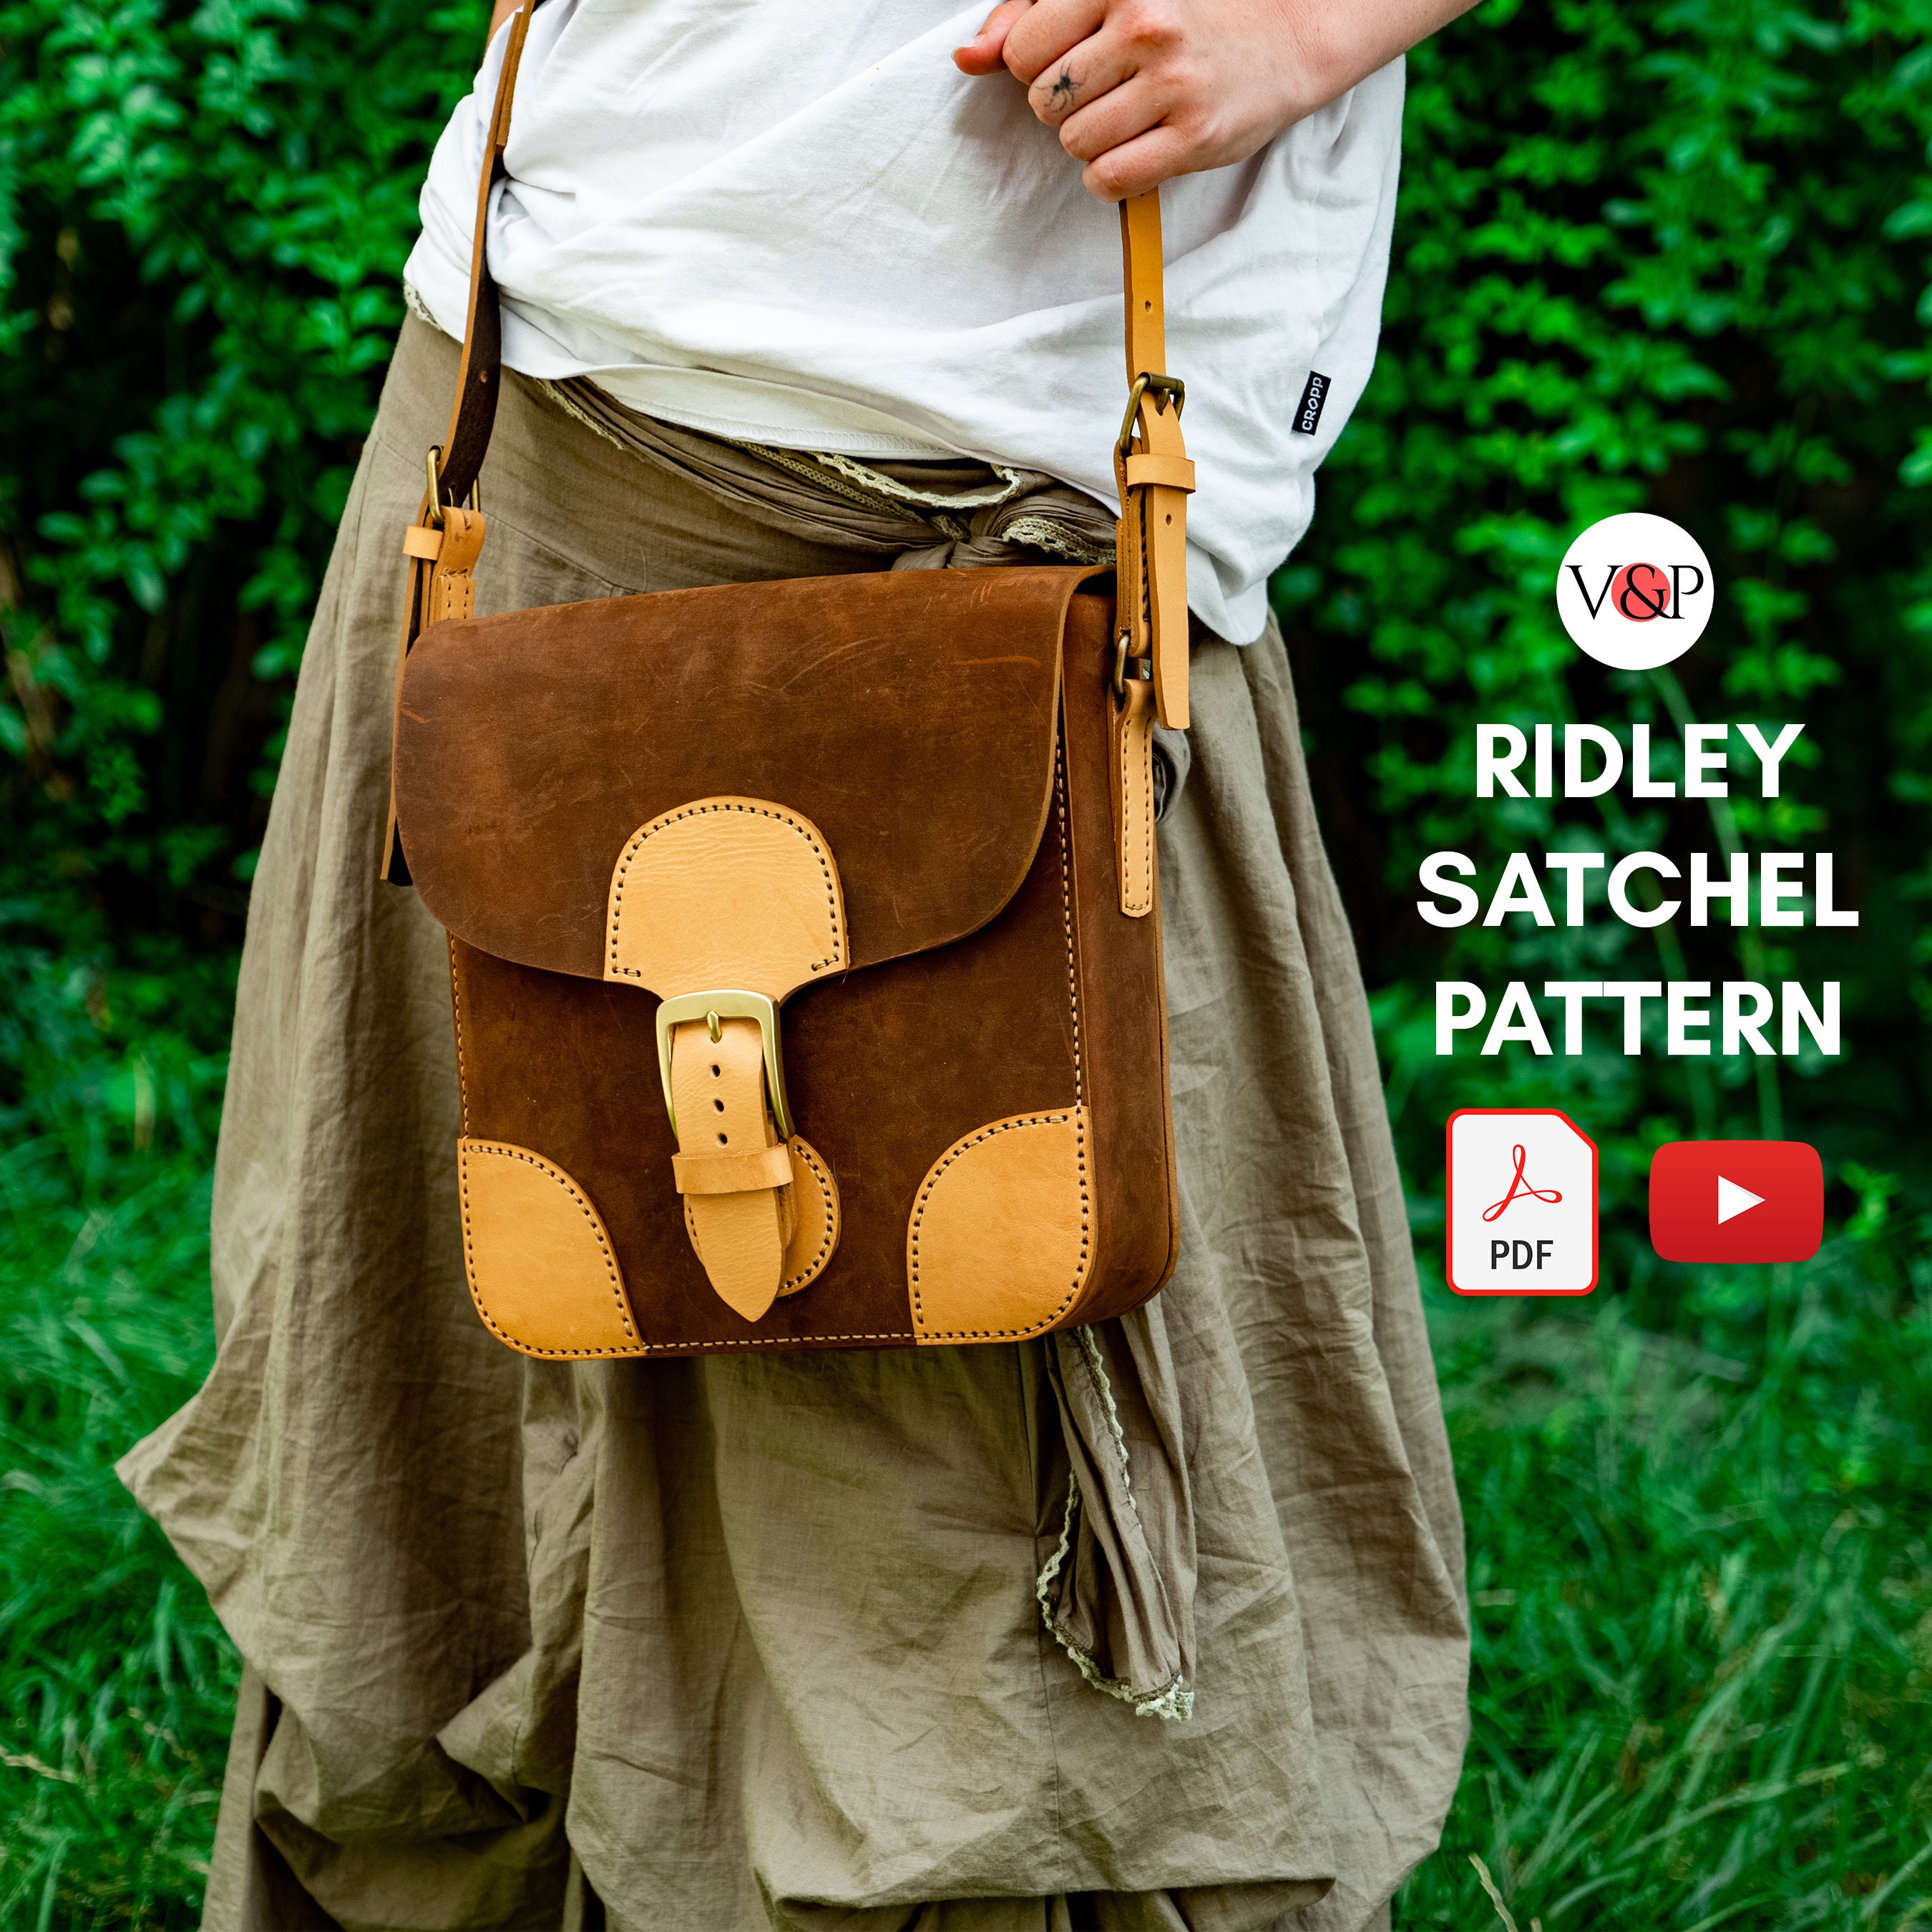 Free pattern: you can try this messenger bag, you'll find the pattern in  the description of the tutorial. It is a relatively simple and fun project  to do. Probably less than 10